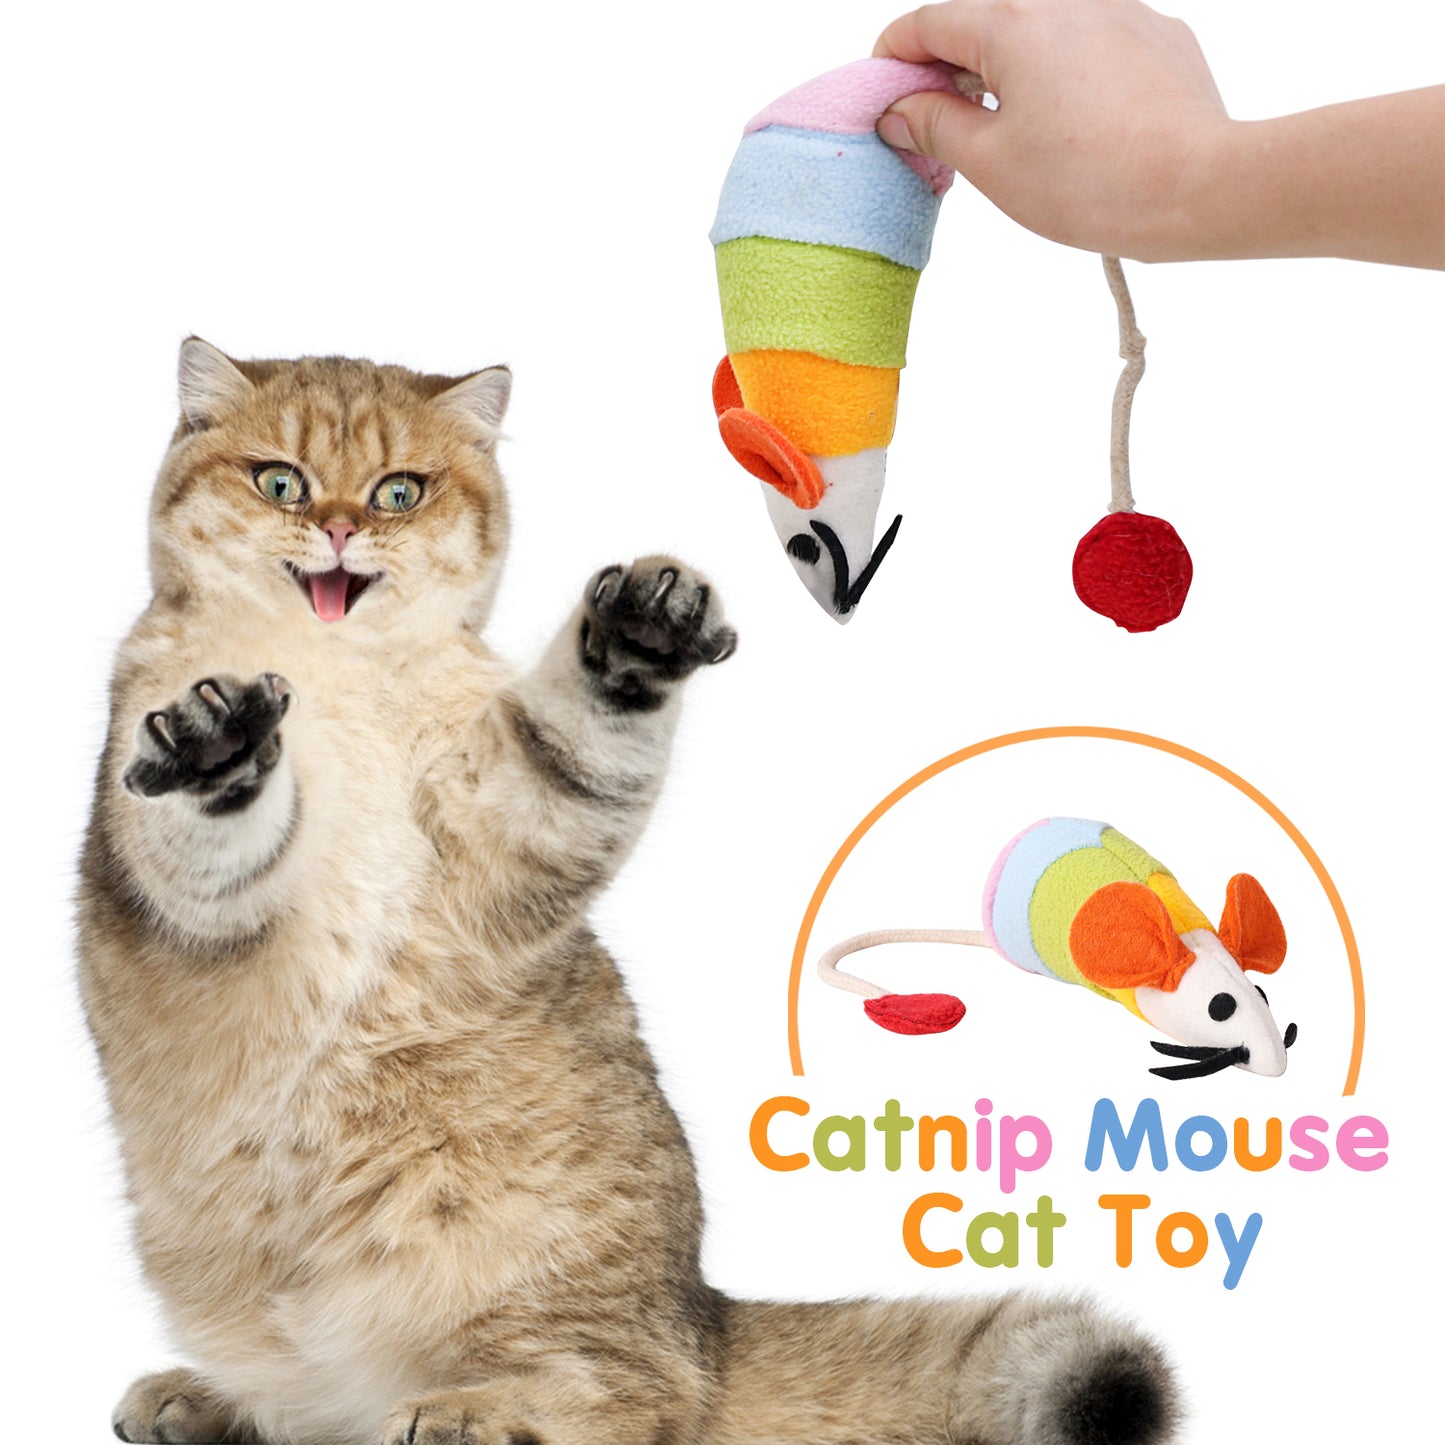 Fastsun Furry Mice Cat Toys, Rattling Catnip Toys Mice, 7” Colored Catnip Toy with Sound, Catnip Prefilled Cat Mice Toy for Indoor Cats Kitten Interactive Play Fetch